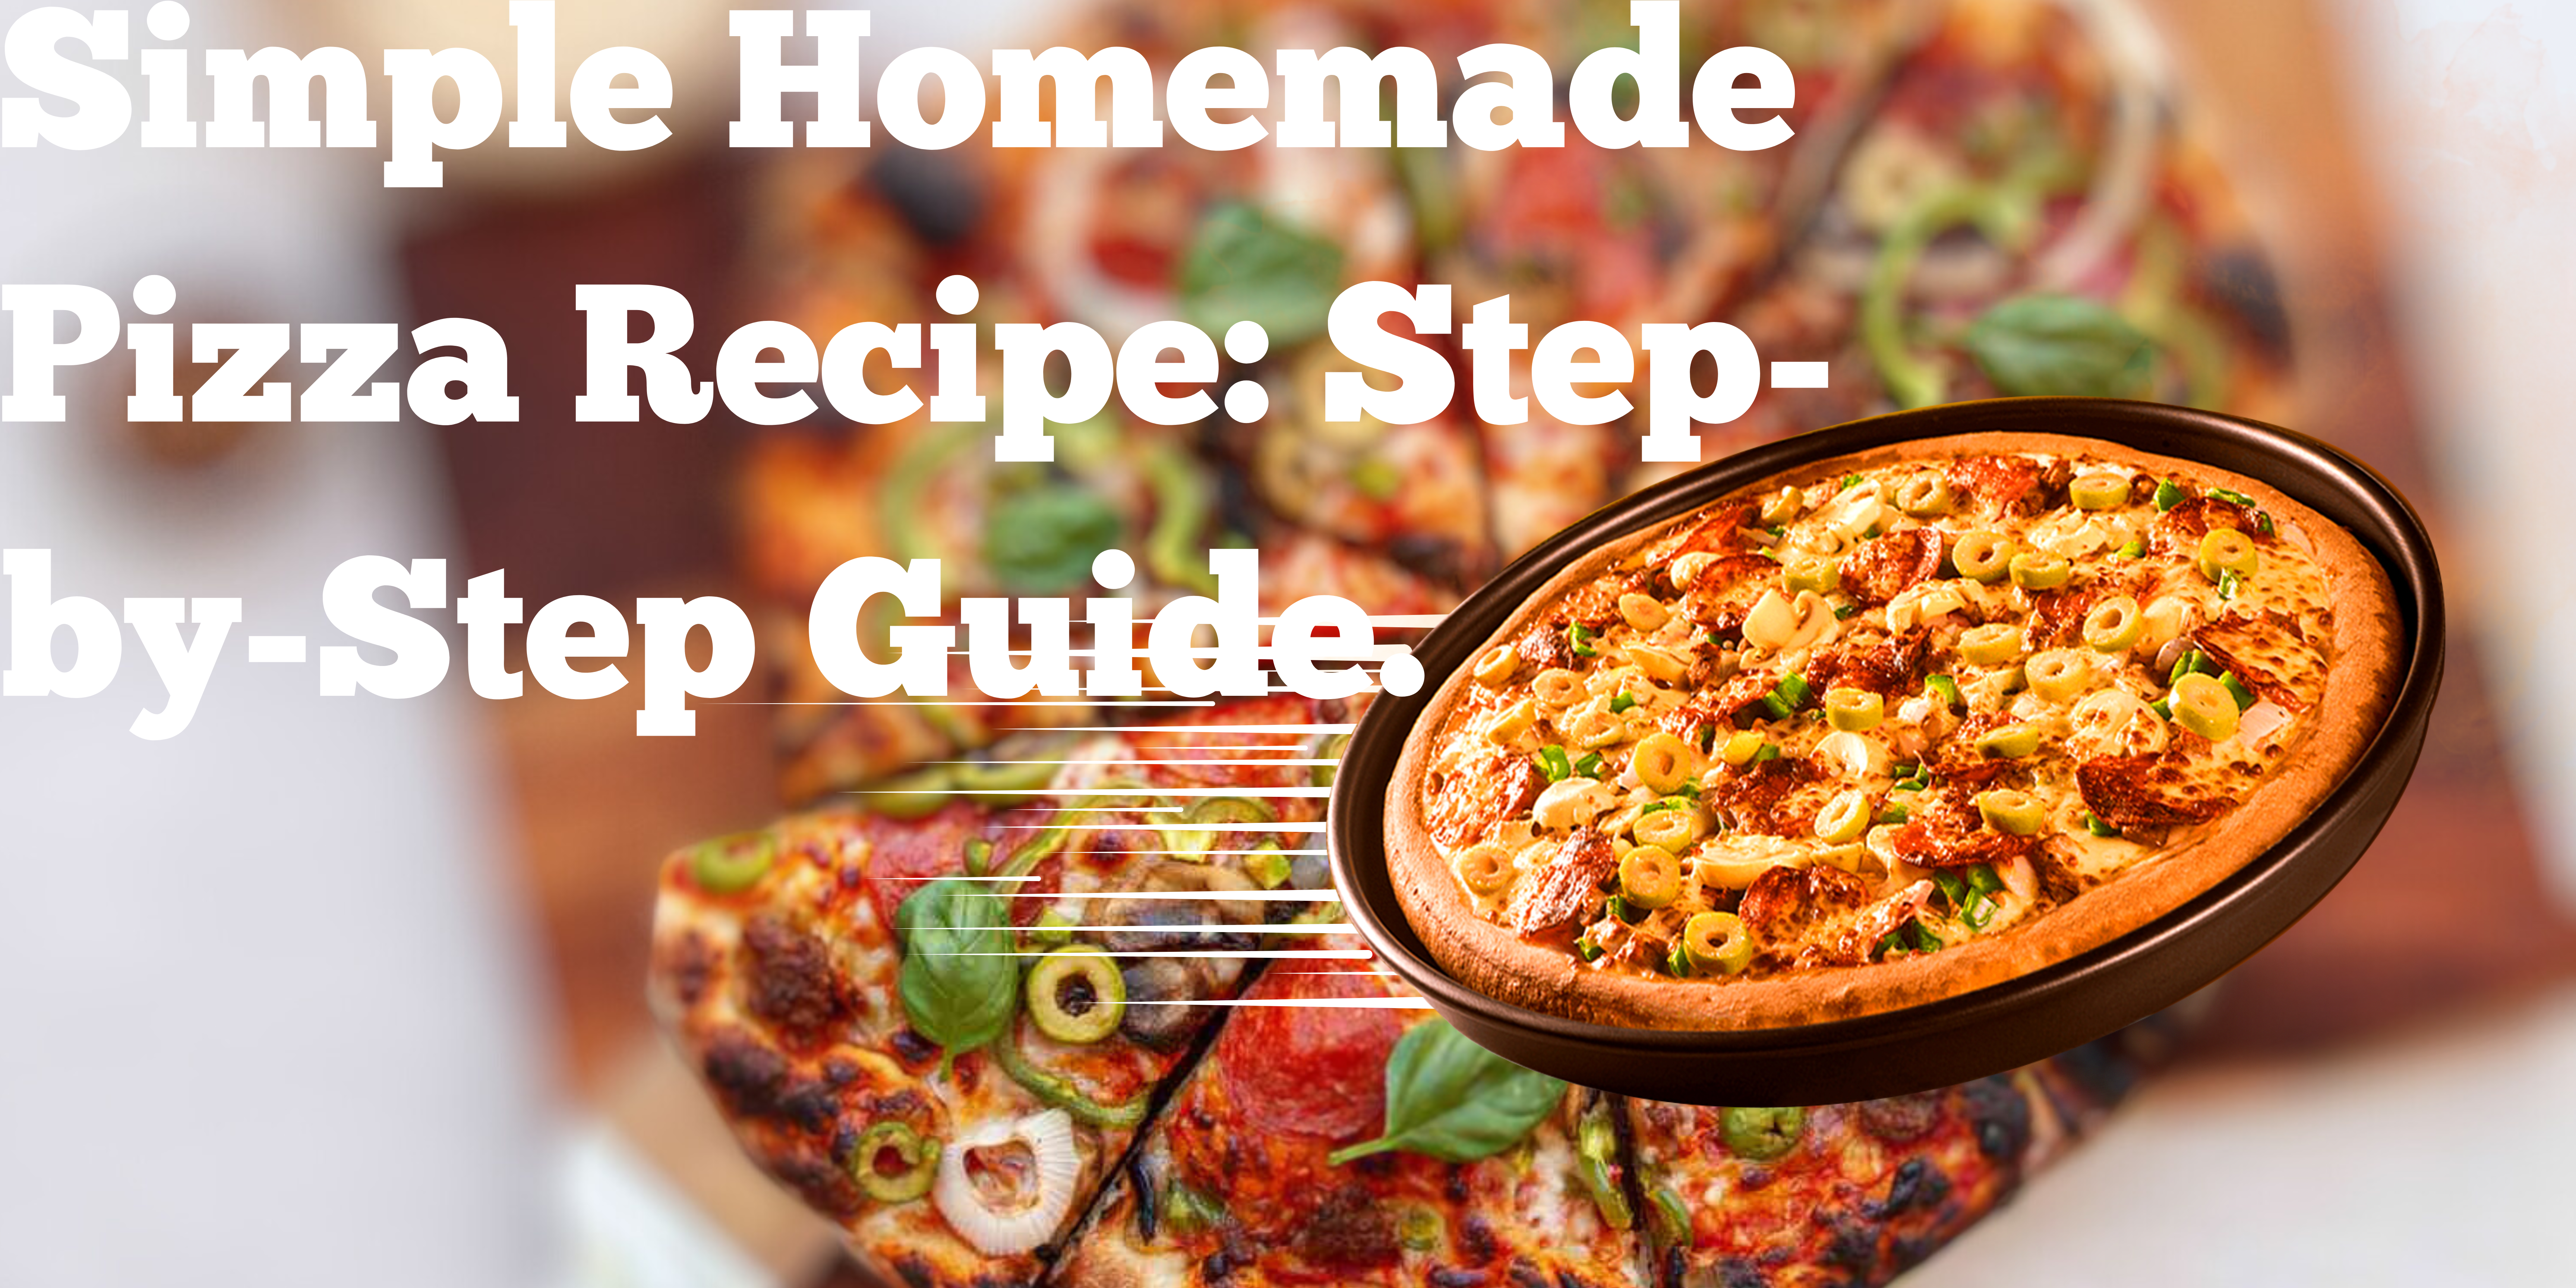 You are currently viewing Simple Homemade Pizza Recipe: Step-by-Step Guide.